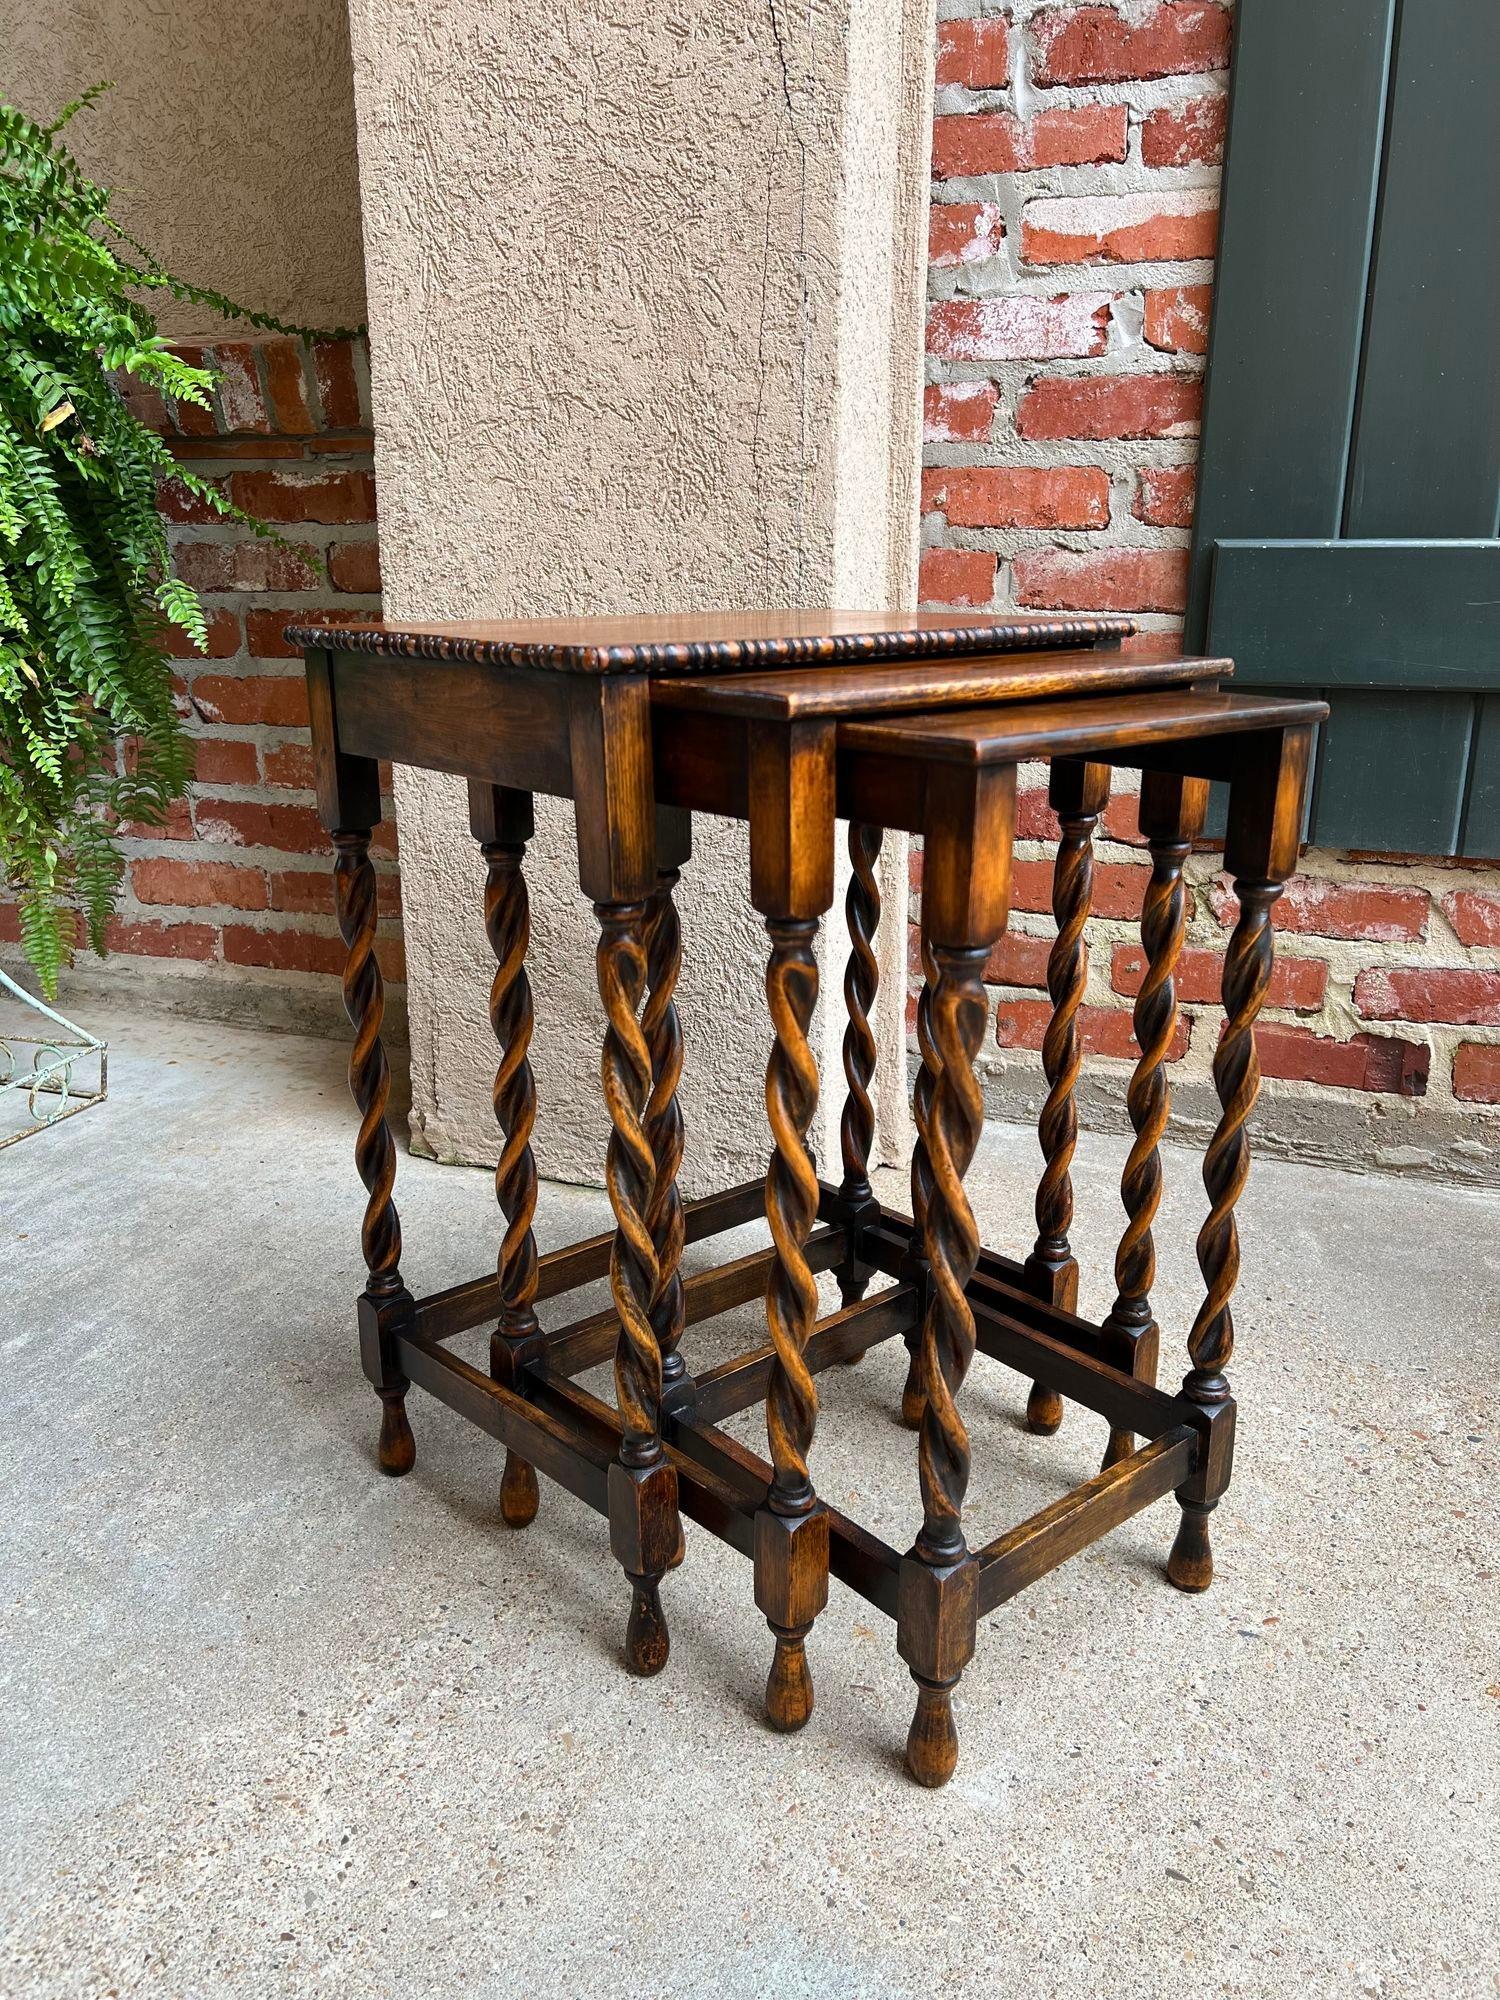 Set 3 Antique English Nesting Table End Sofa Table Barley Twist Tiger Oak Petite Size.

Direct from England, a complete set of 3 antique English nesting tables! With their fabulous style, size and versatility, these sets are one of THE most